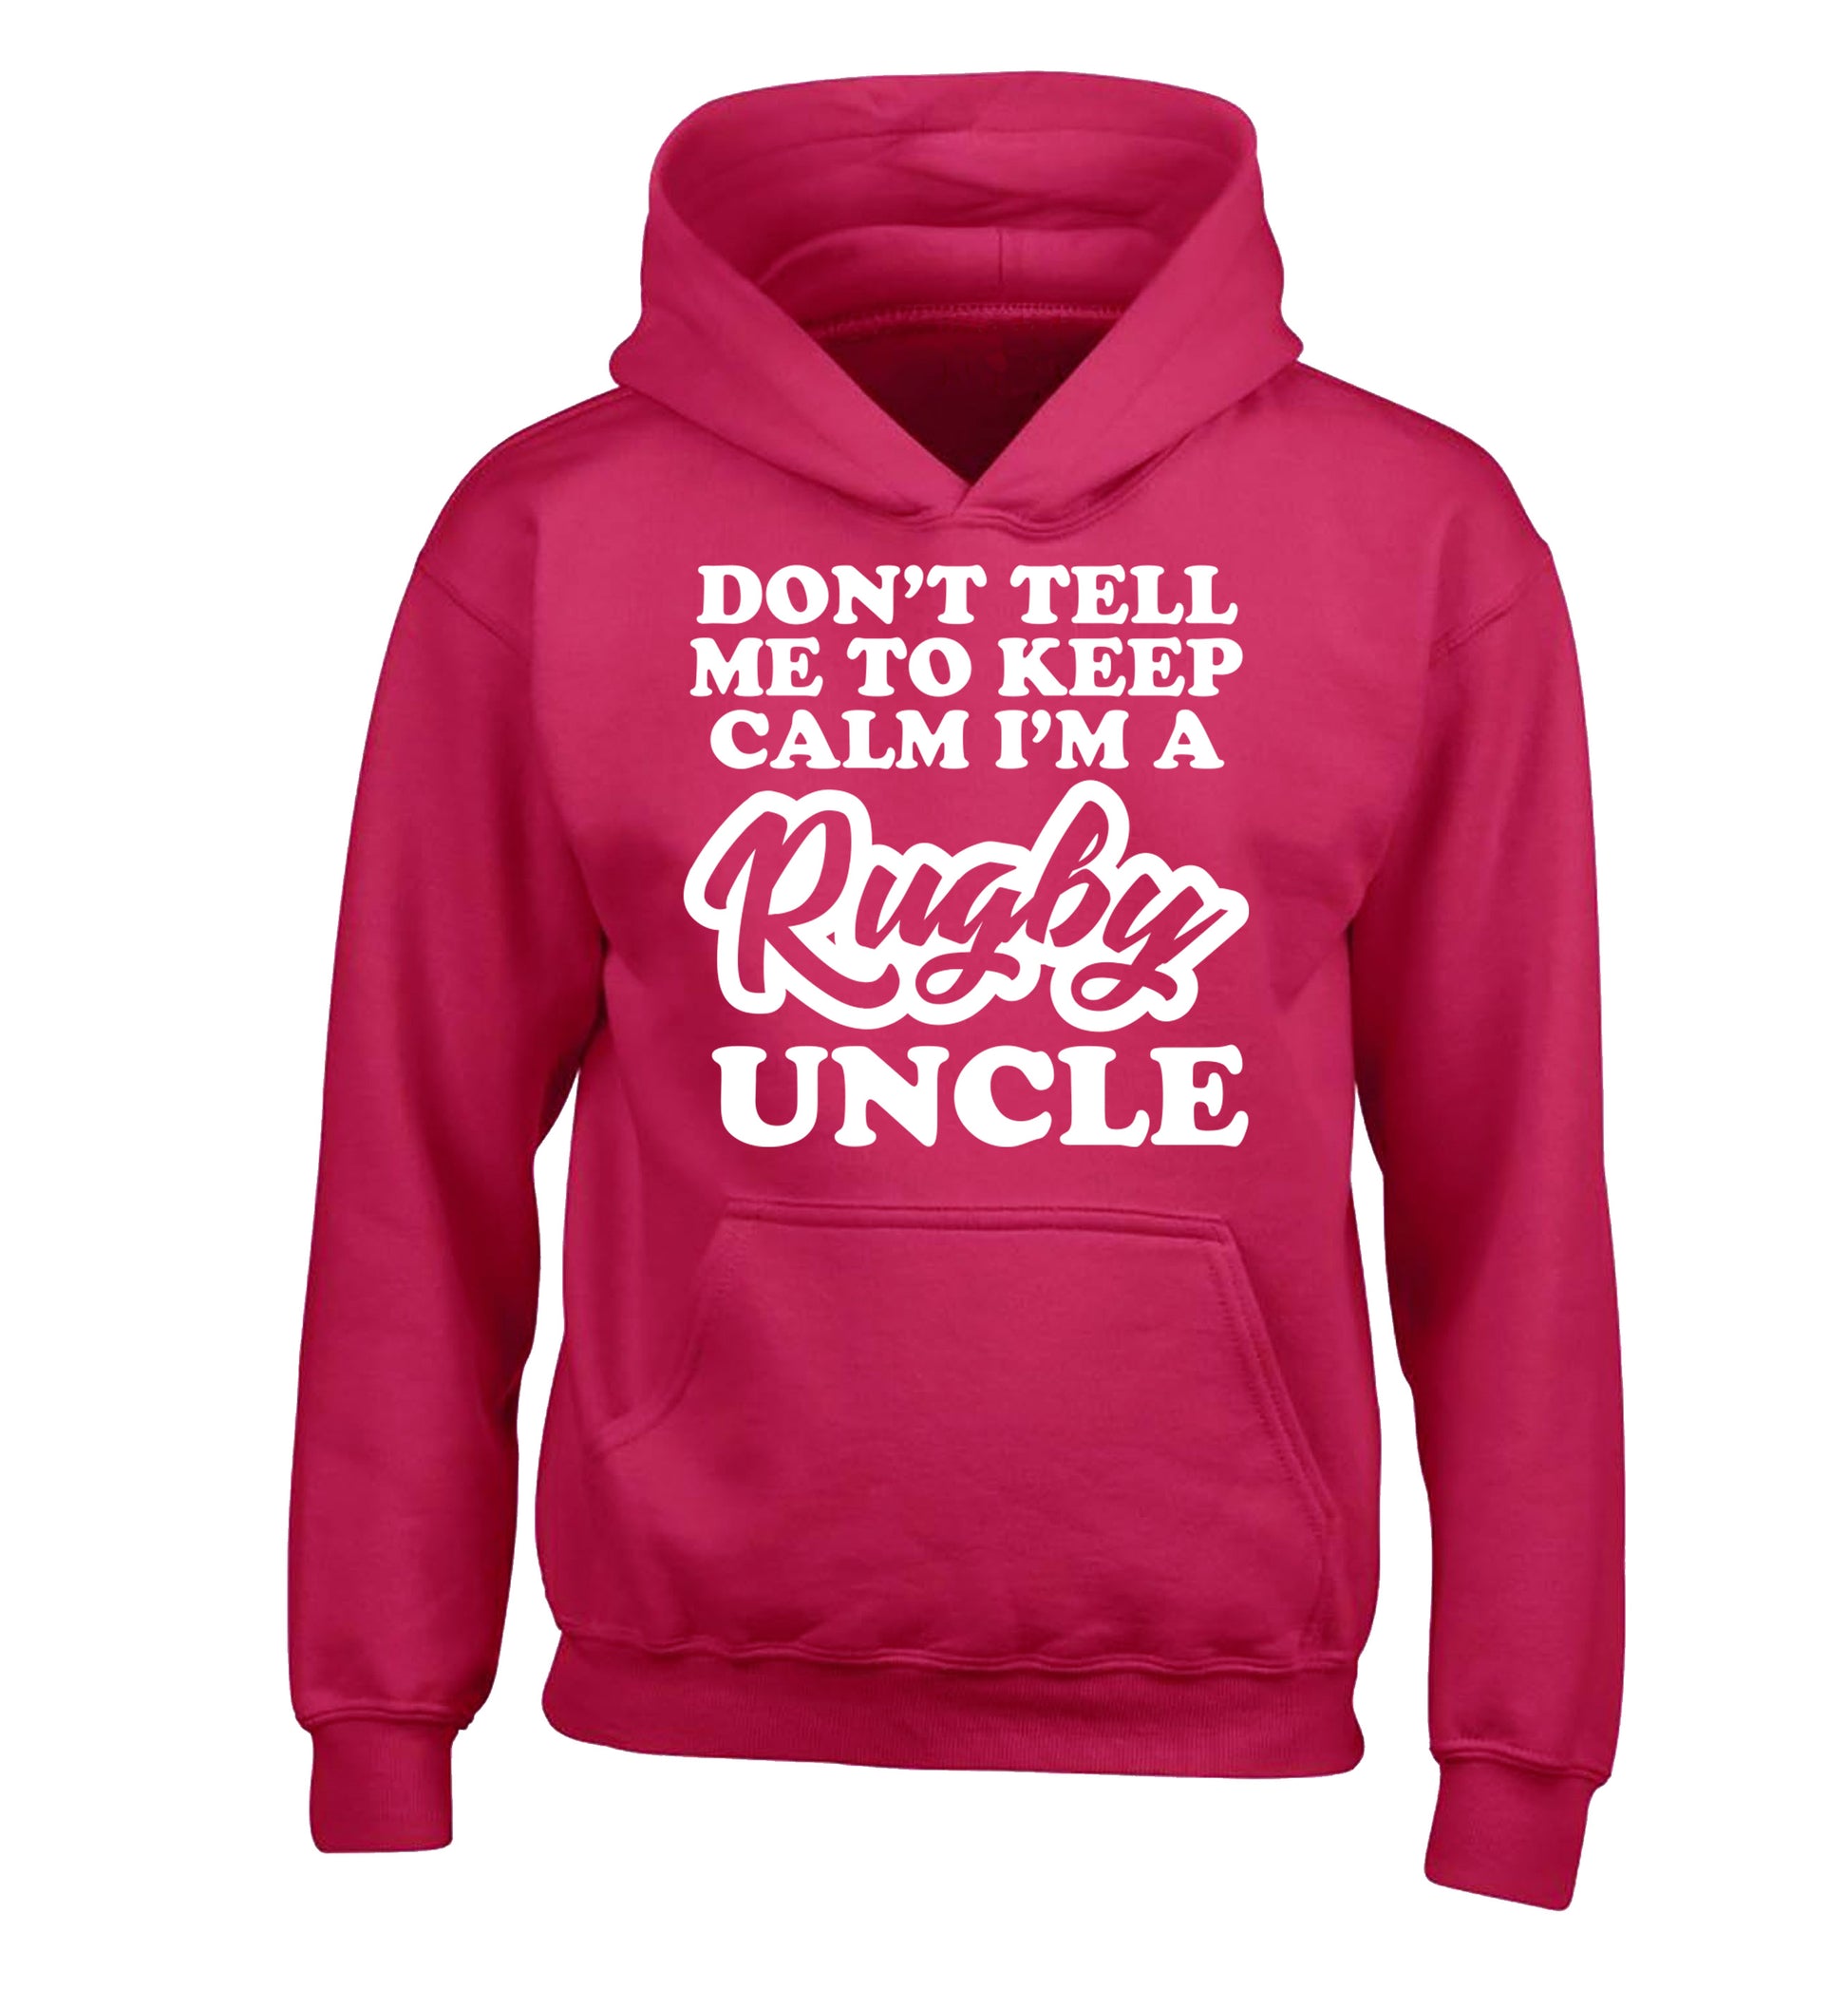 Don't tell me to keep calm I'm a rugby uncle children's pink hoodie 12-13 Years